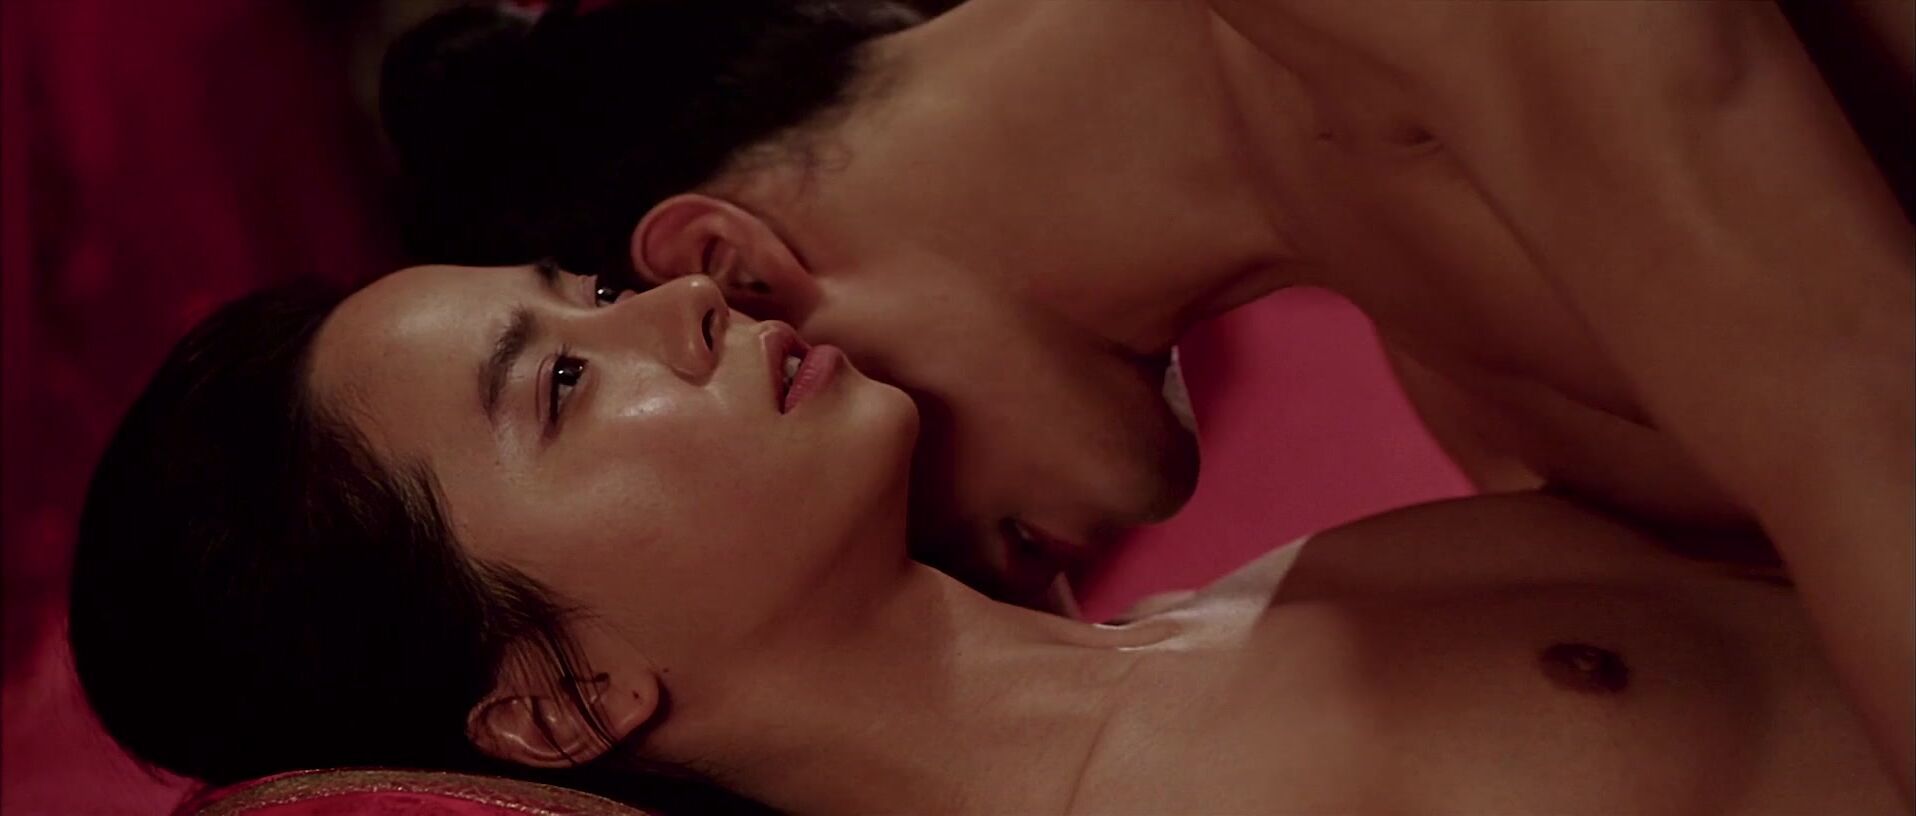 FPO.XXX A Frozen Flower movie sex scene starring Song Ji-hyo nude in role of the queen (2008) Erito - 2